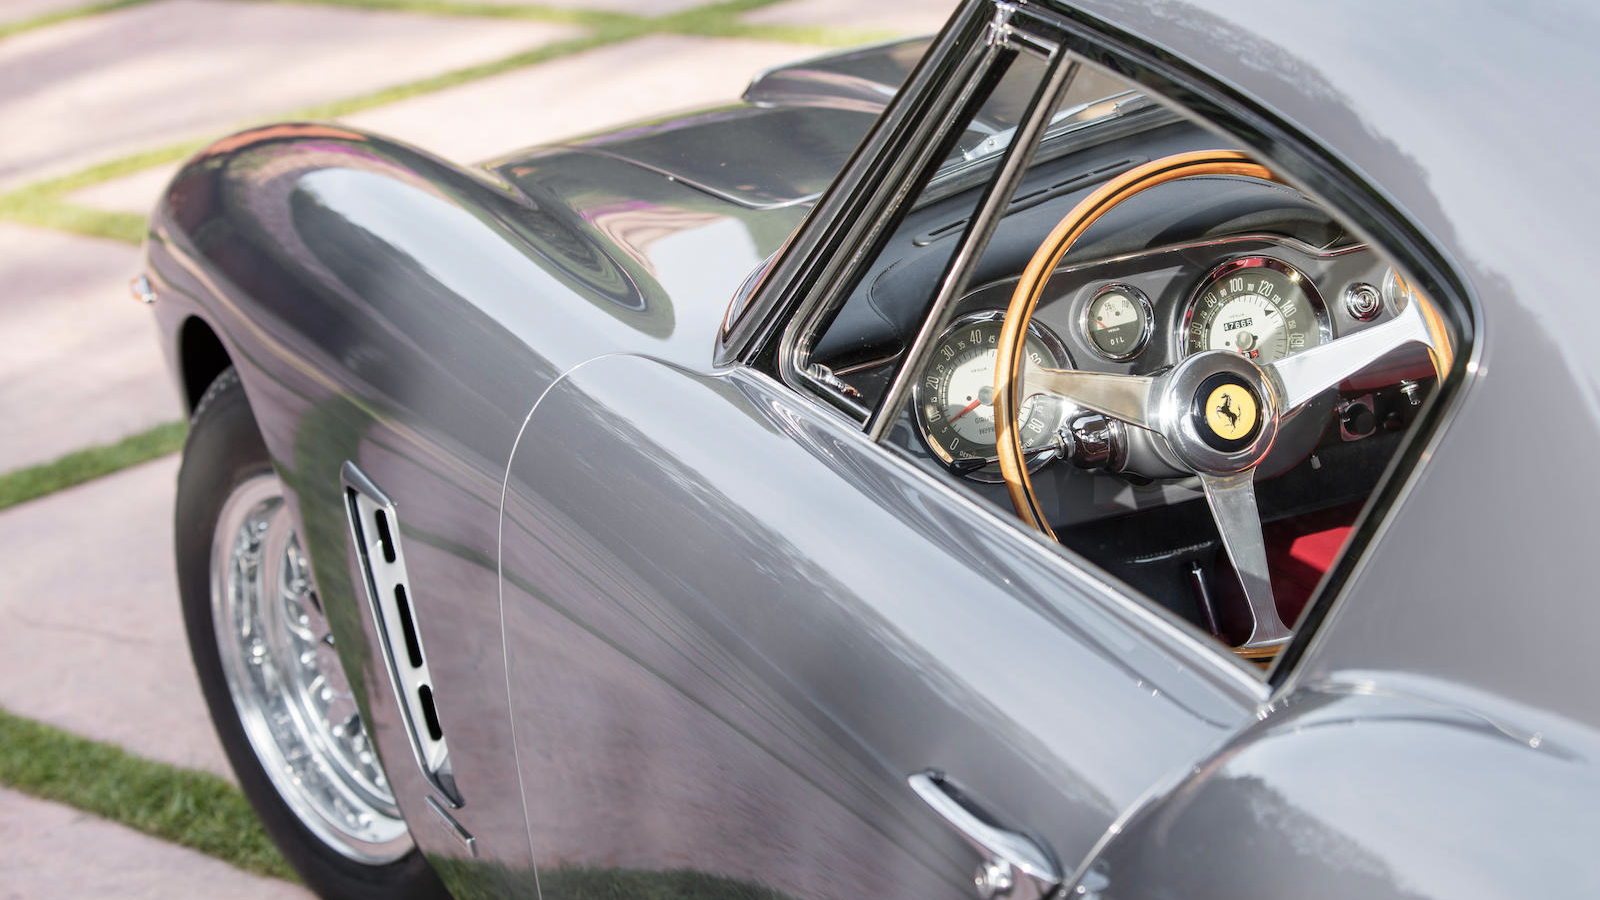 This £10m Ferrari is perfect in every way